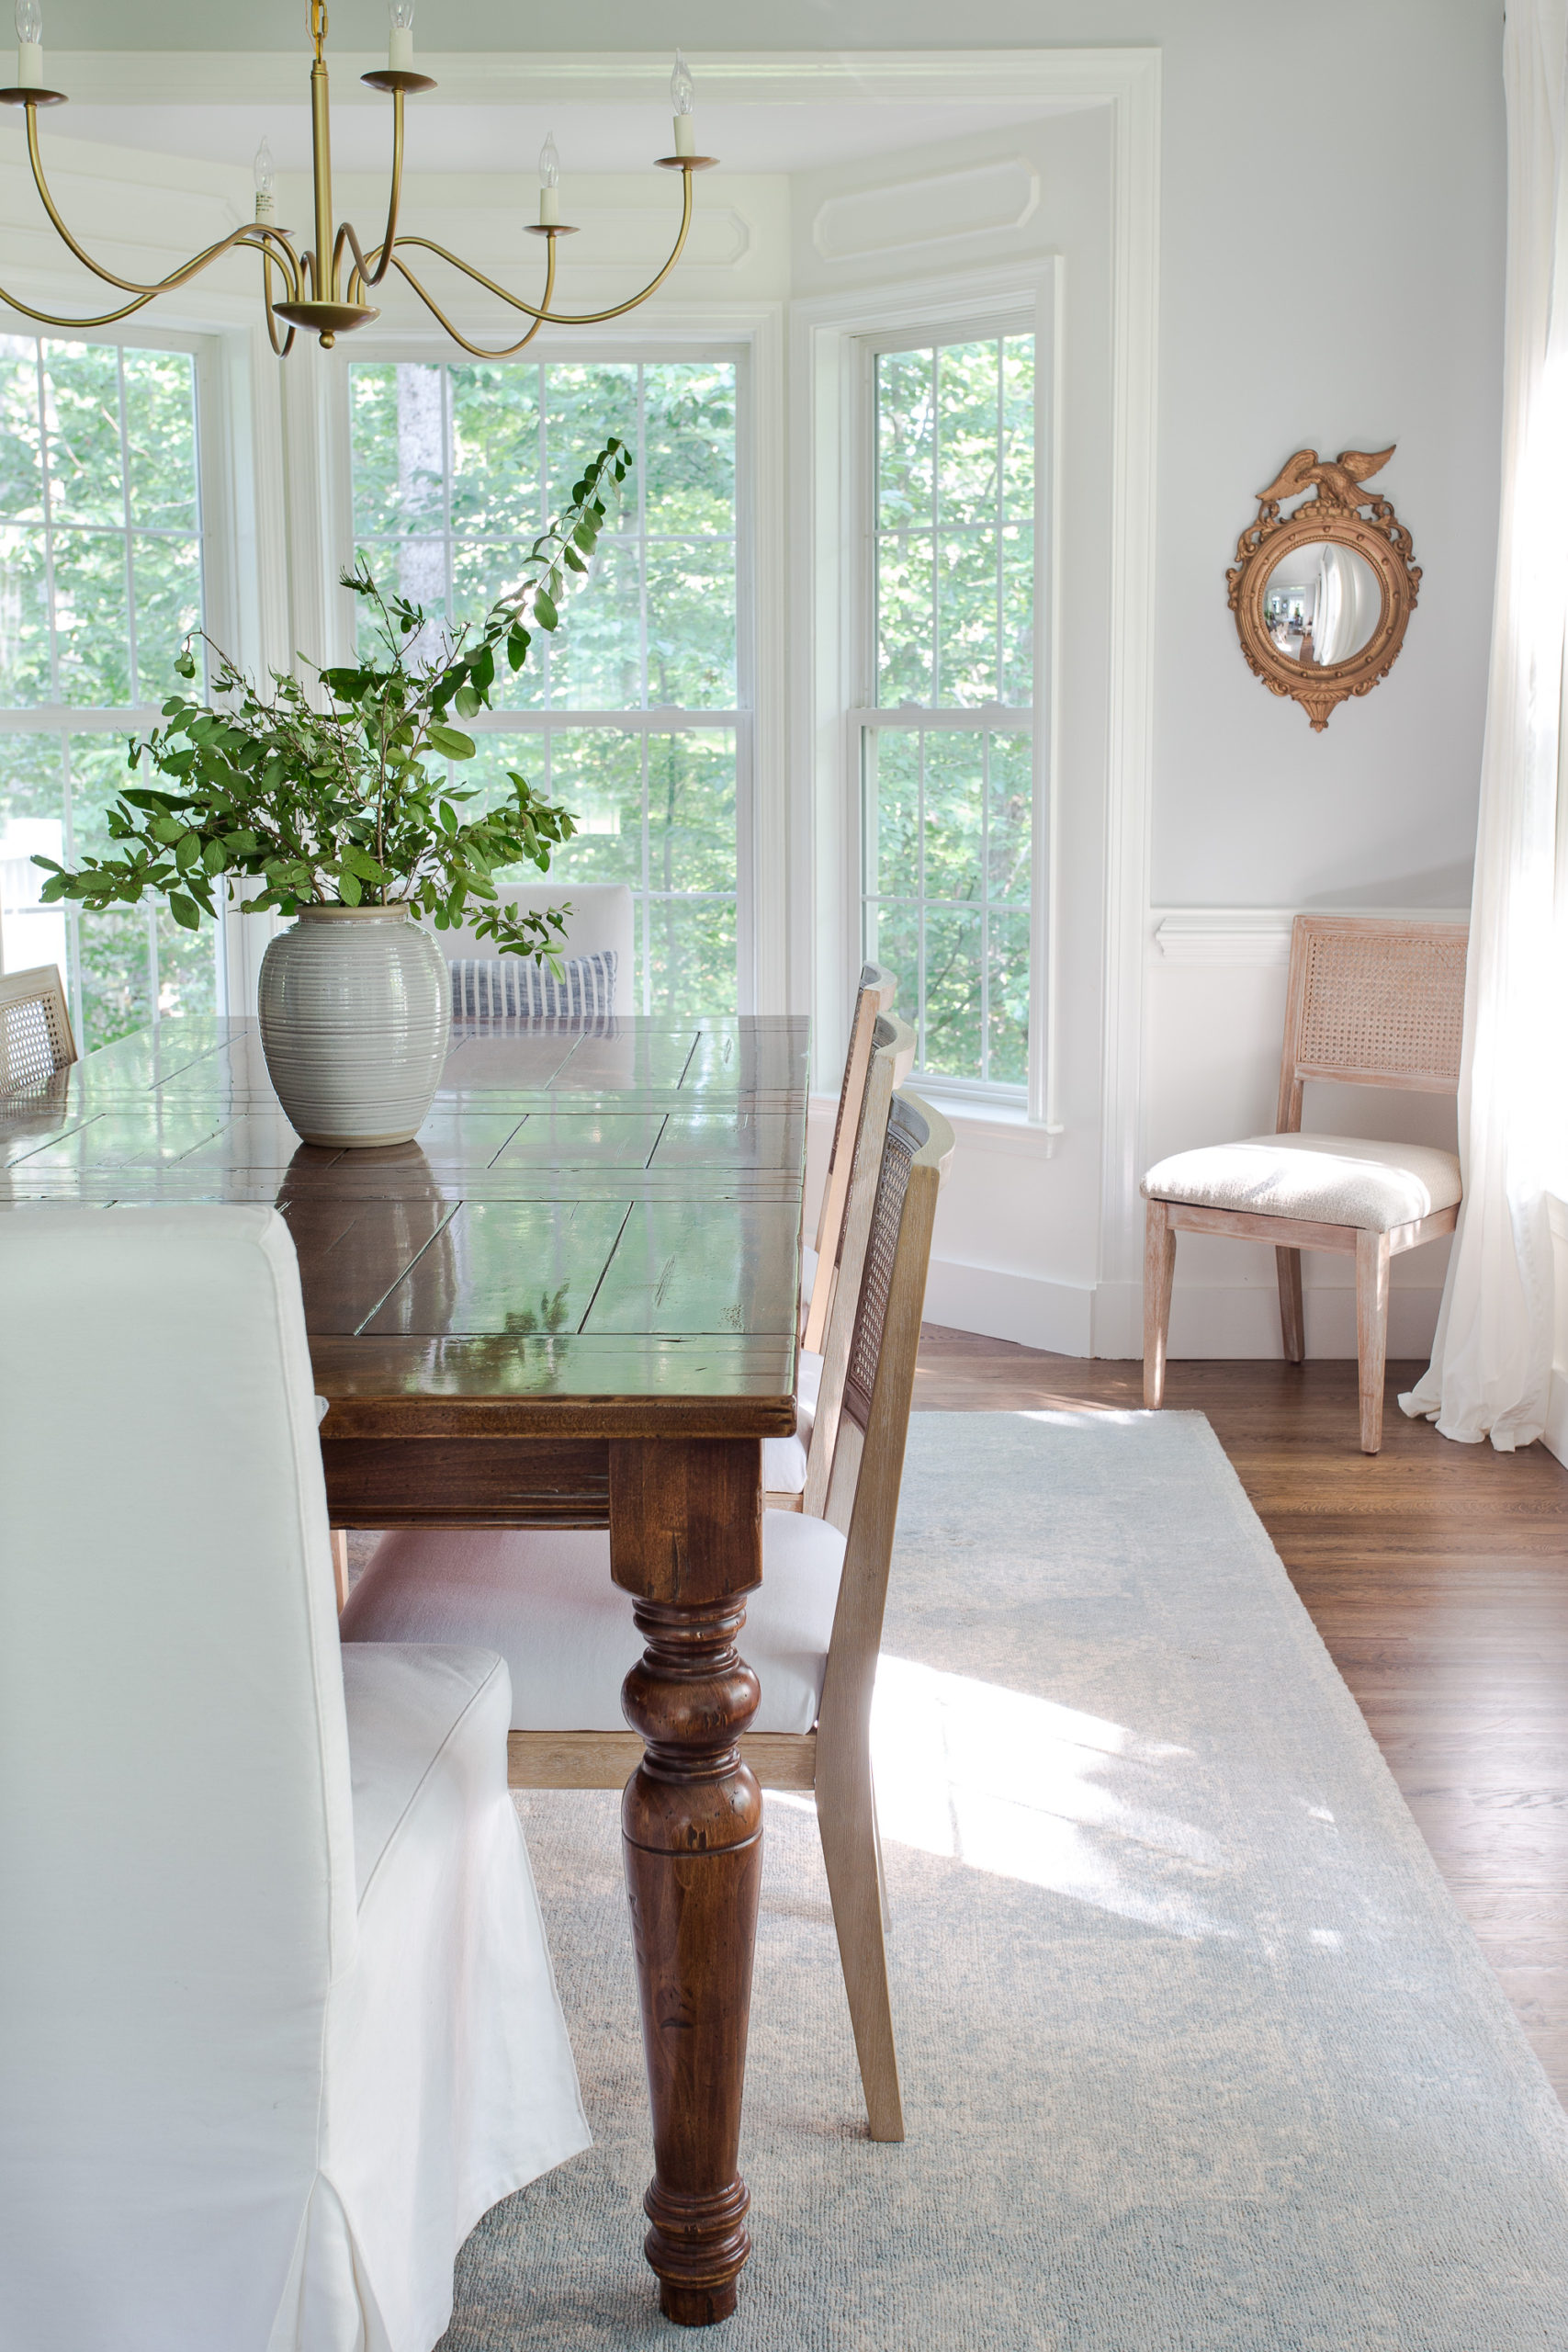 dining room table with chairs on rug with vase of greenery sitting on table and bay window in background